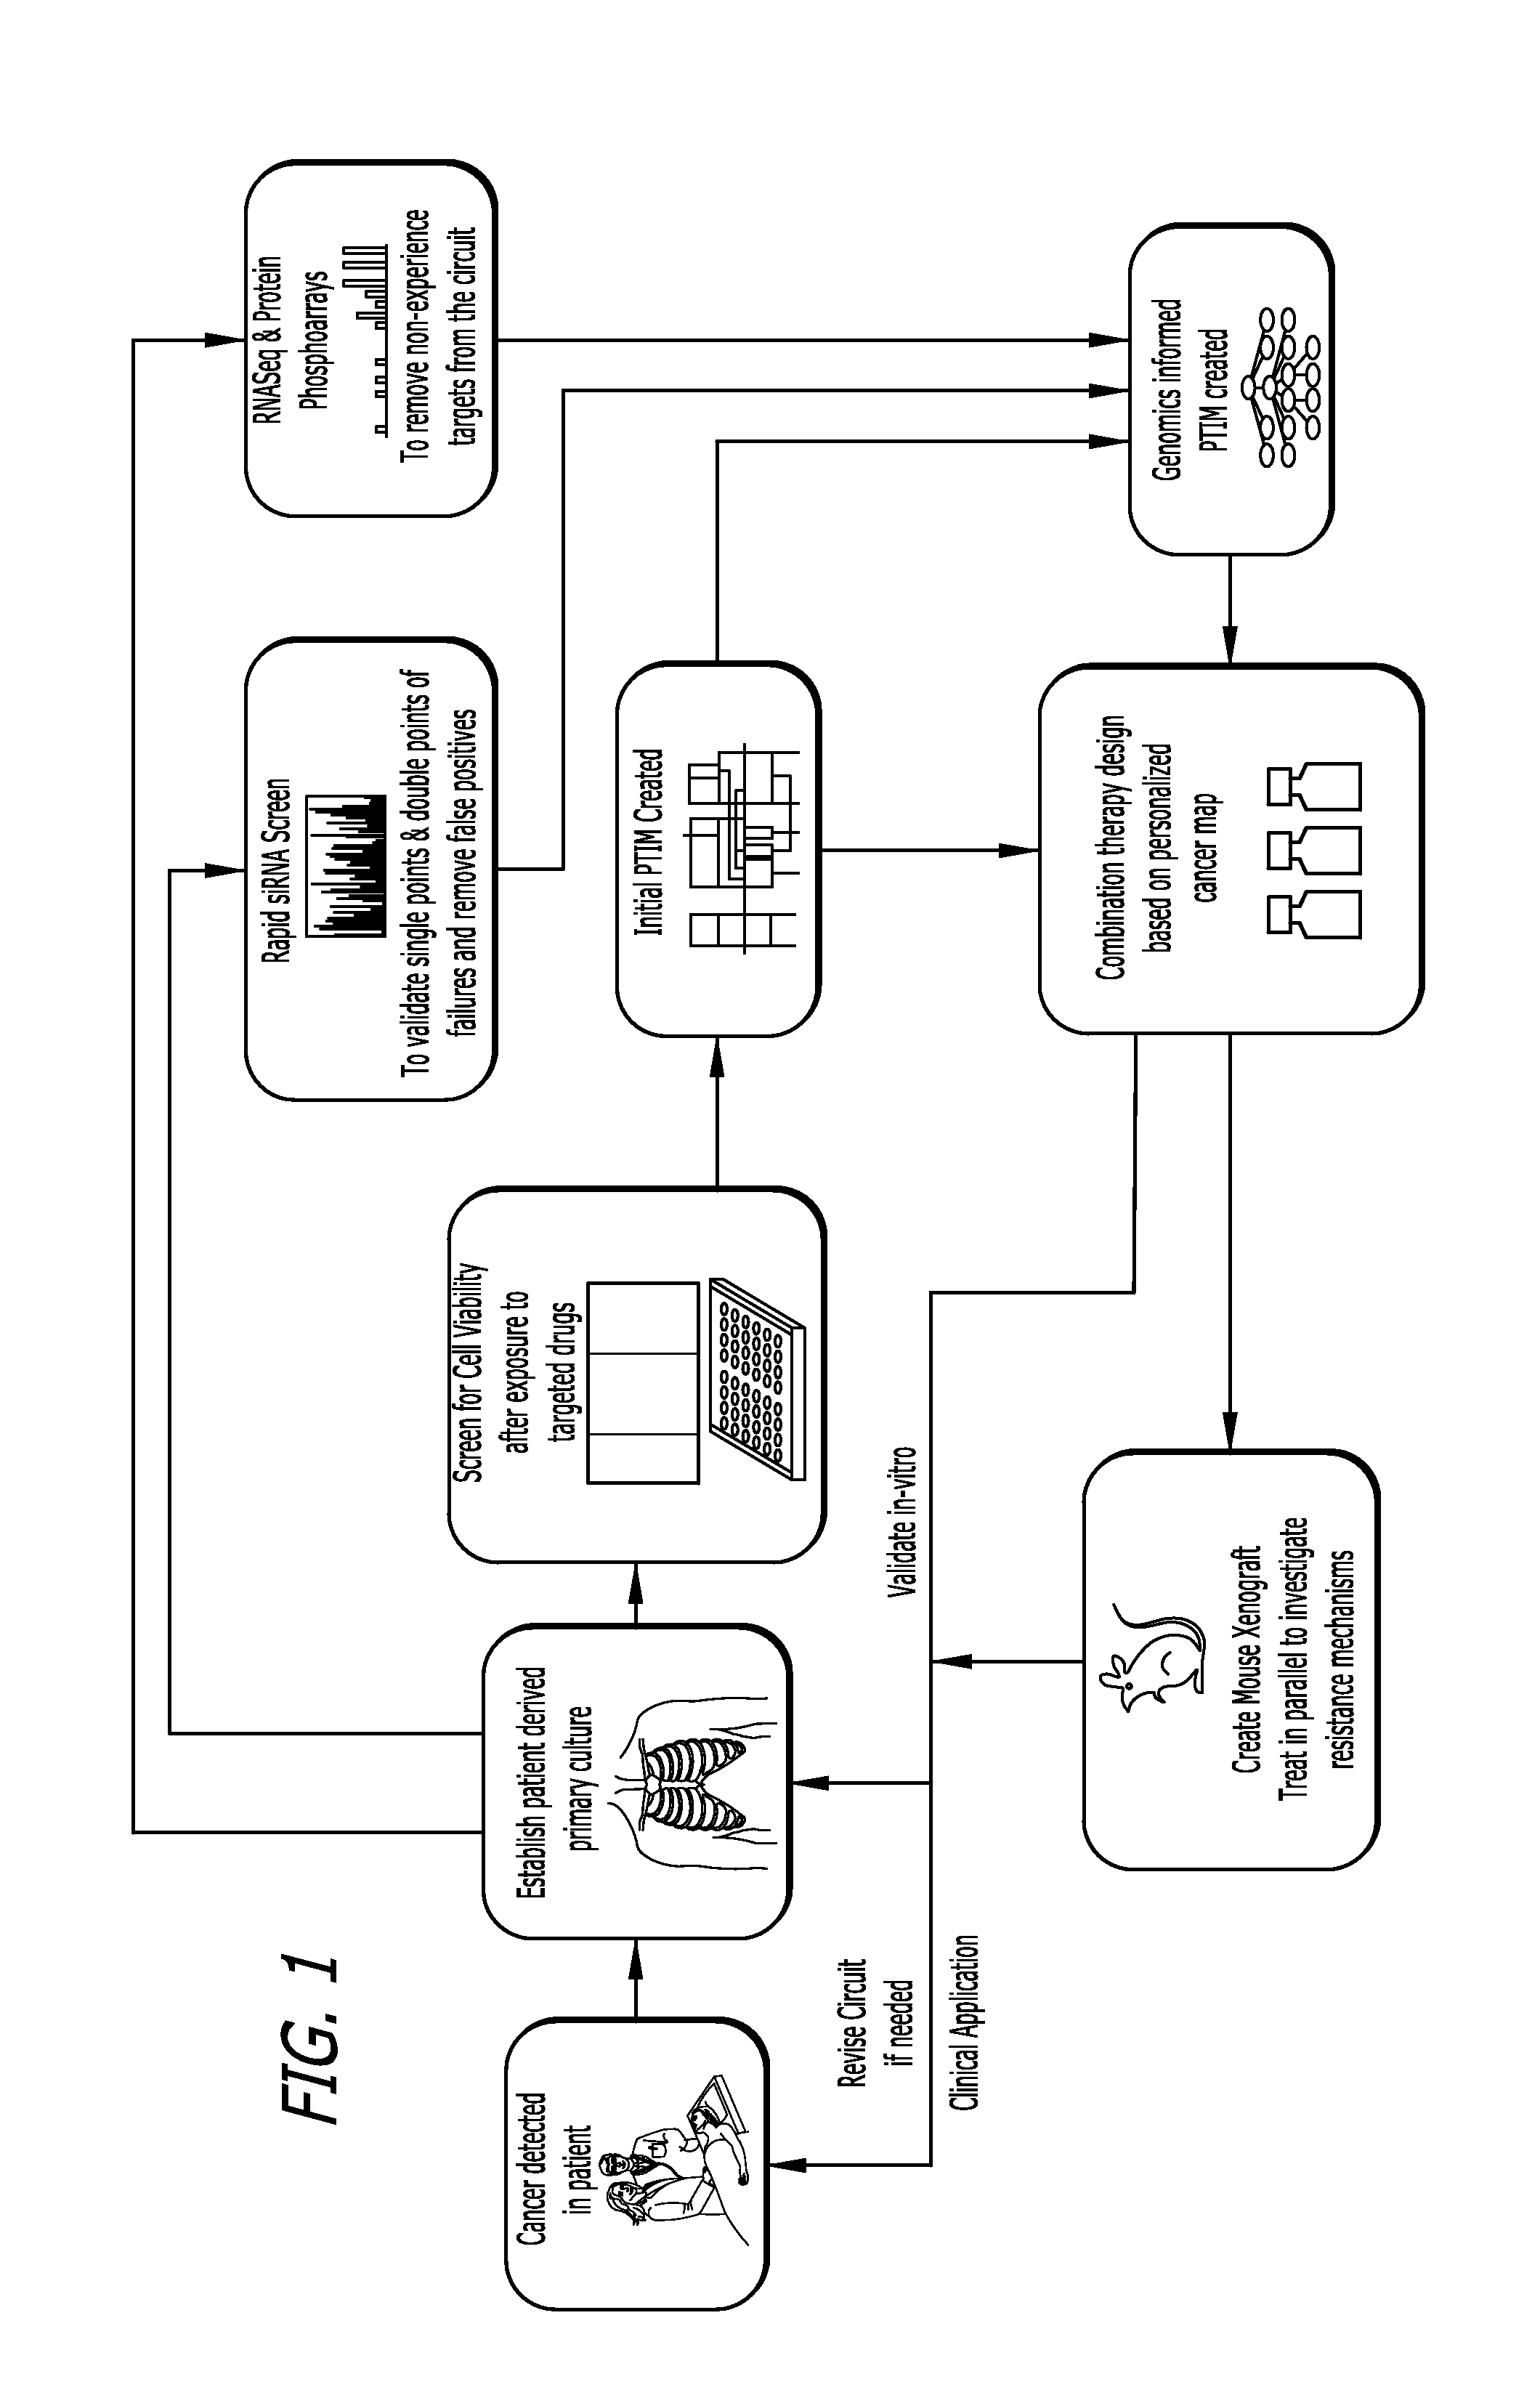 Target inhibition map system for combination therapy design and methods of using same